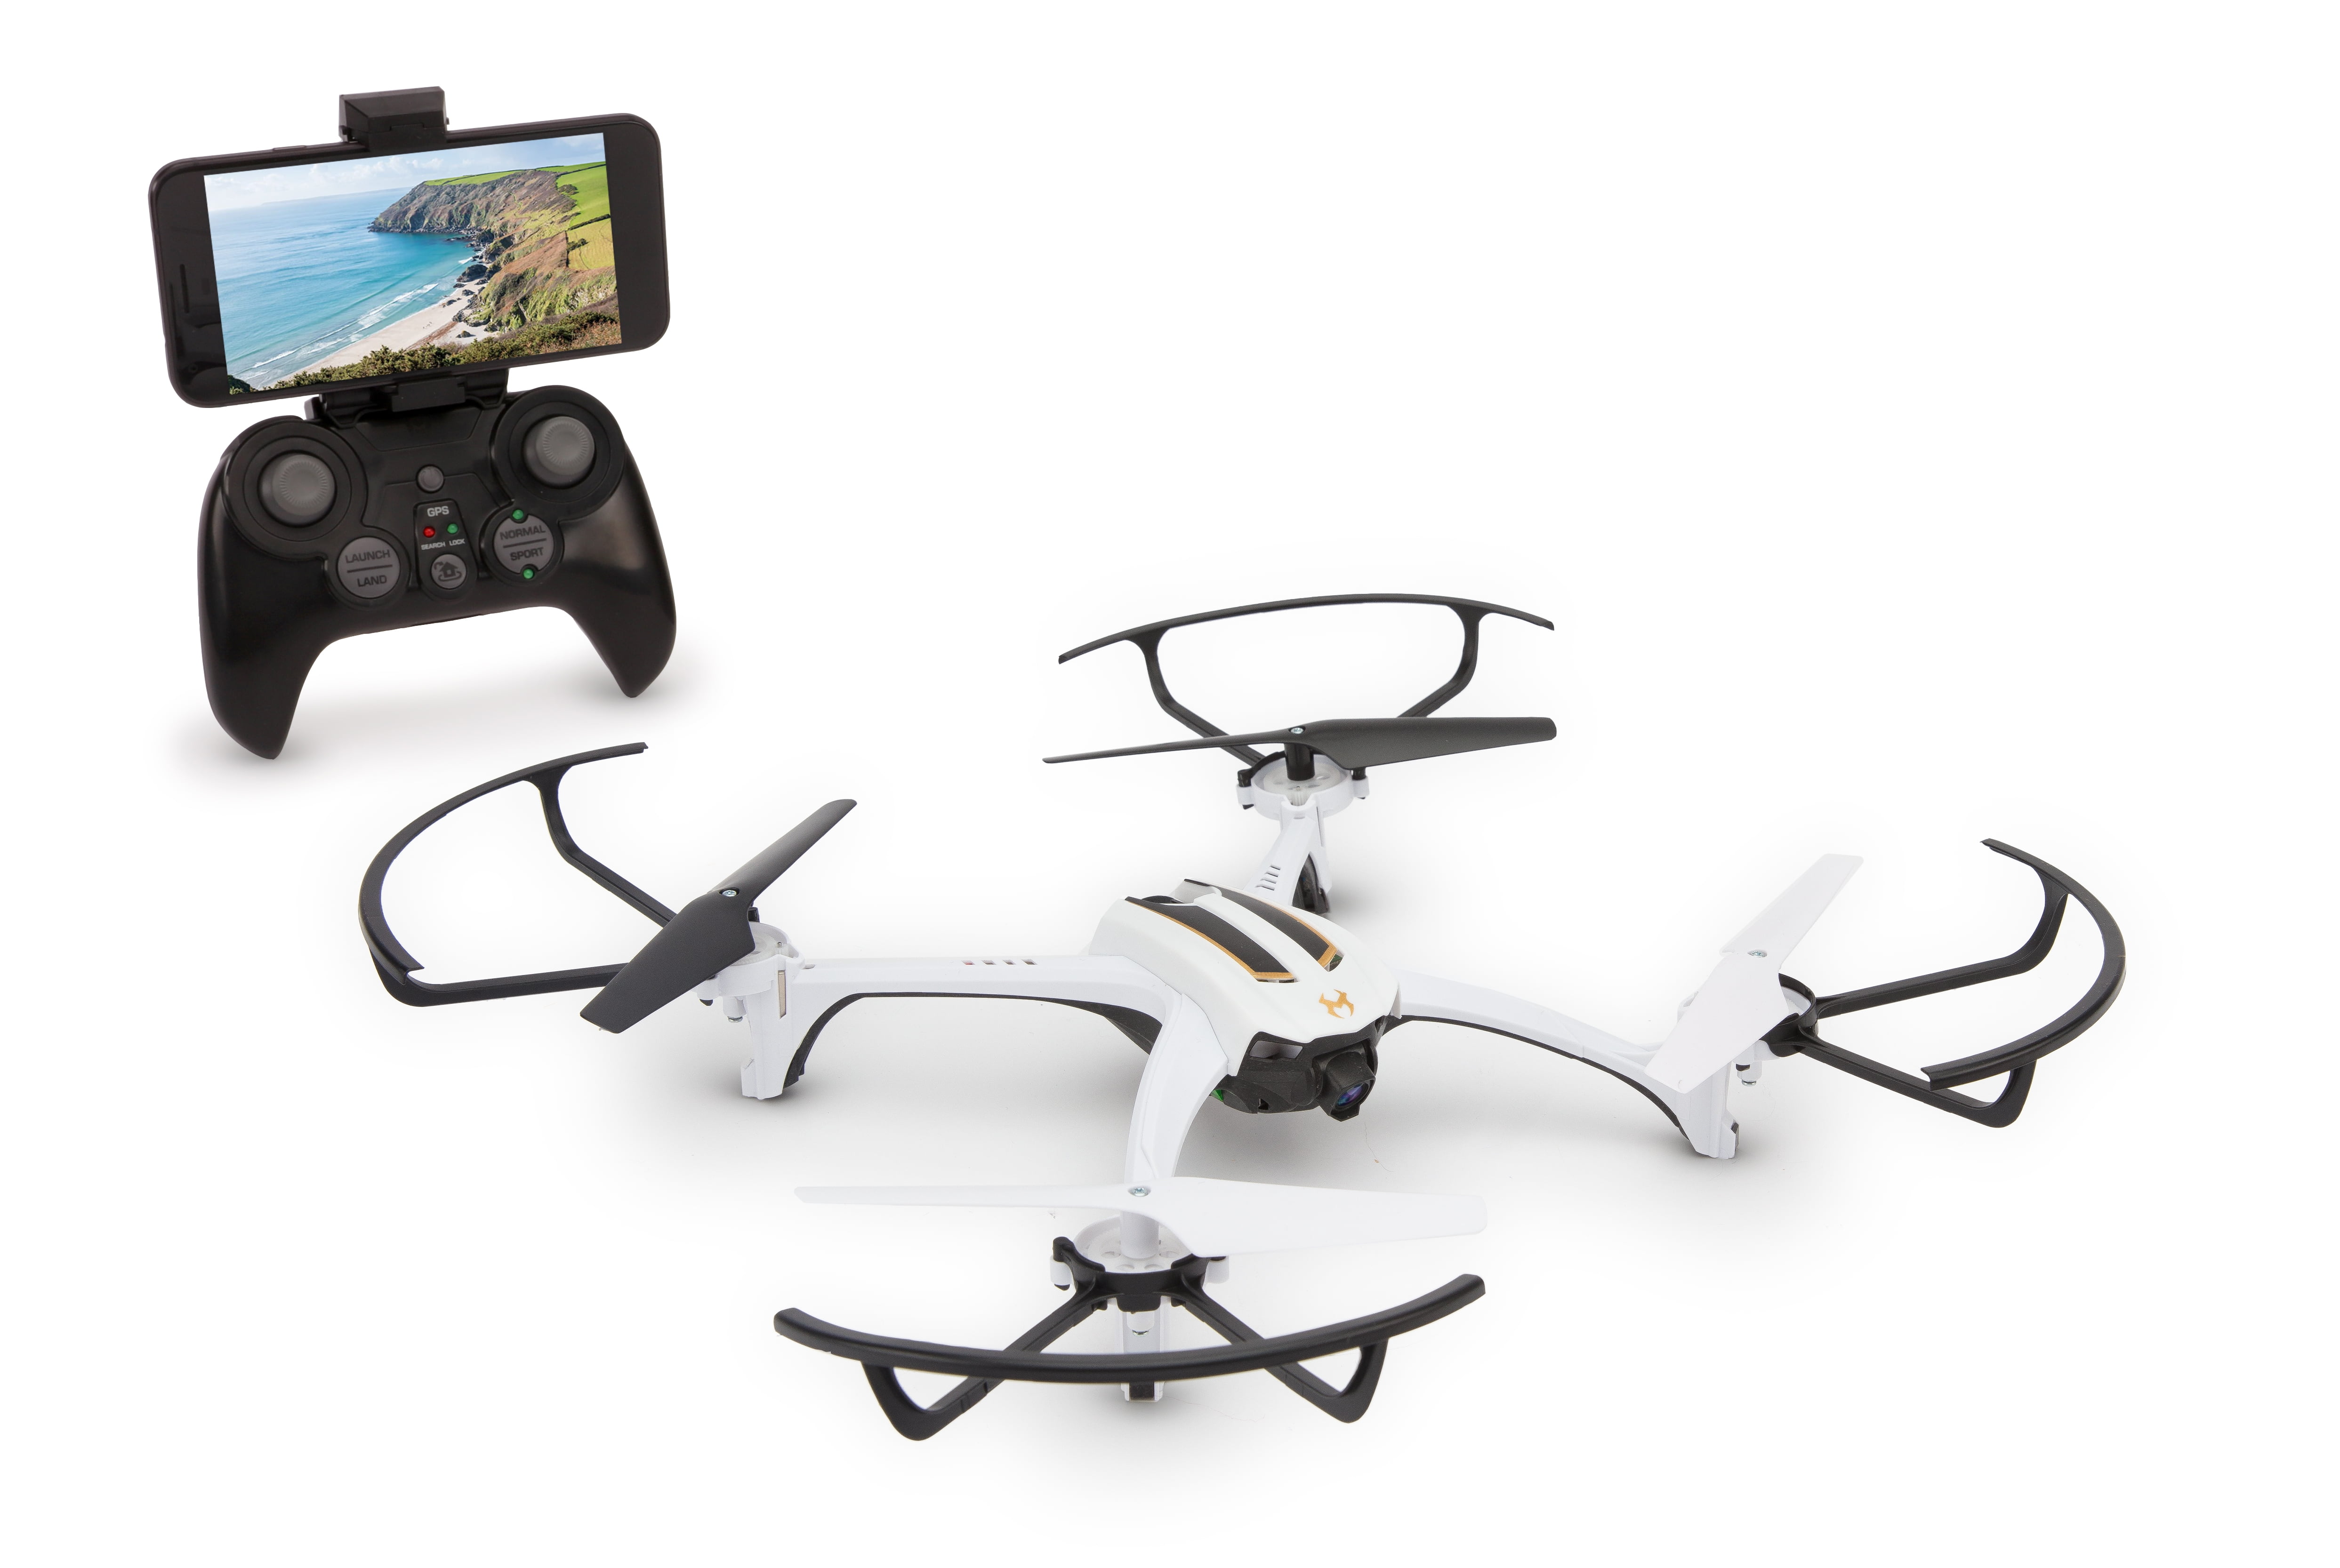 Sky Viper Journey Pro GPS Live Streaming & Video Recording Drone Quadcopter